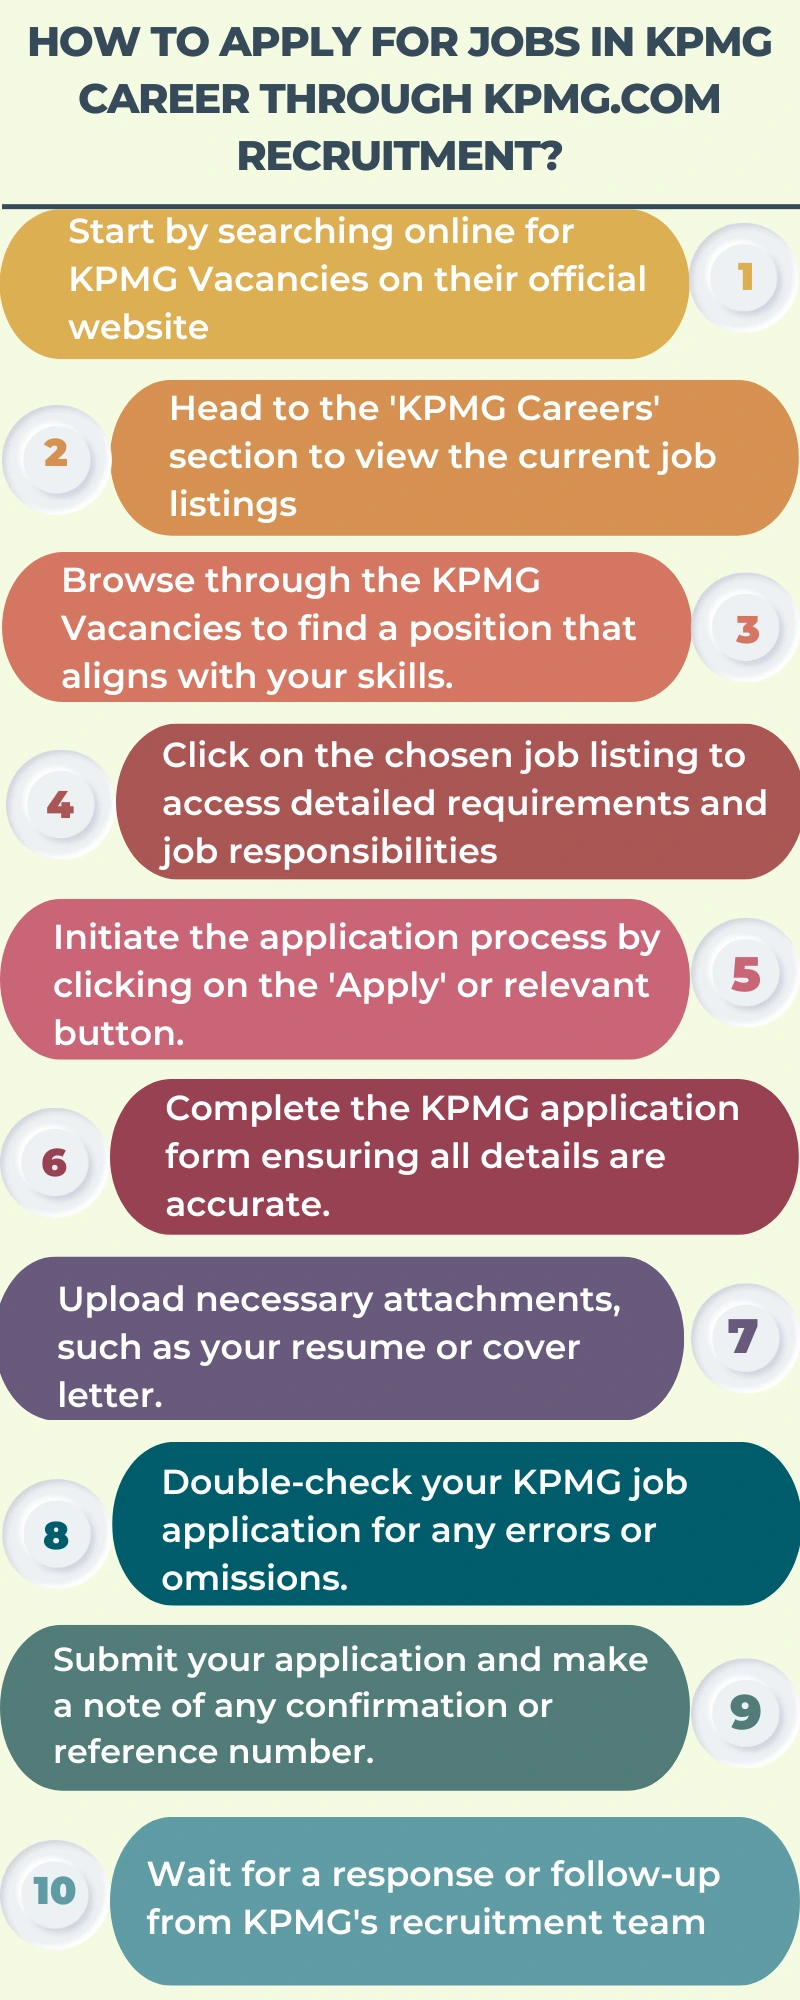 How to Apply for Jobs in KPMG Career through kpmg.com recruitment?